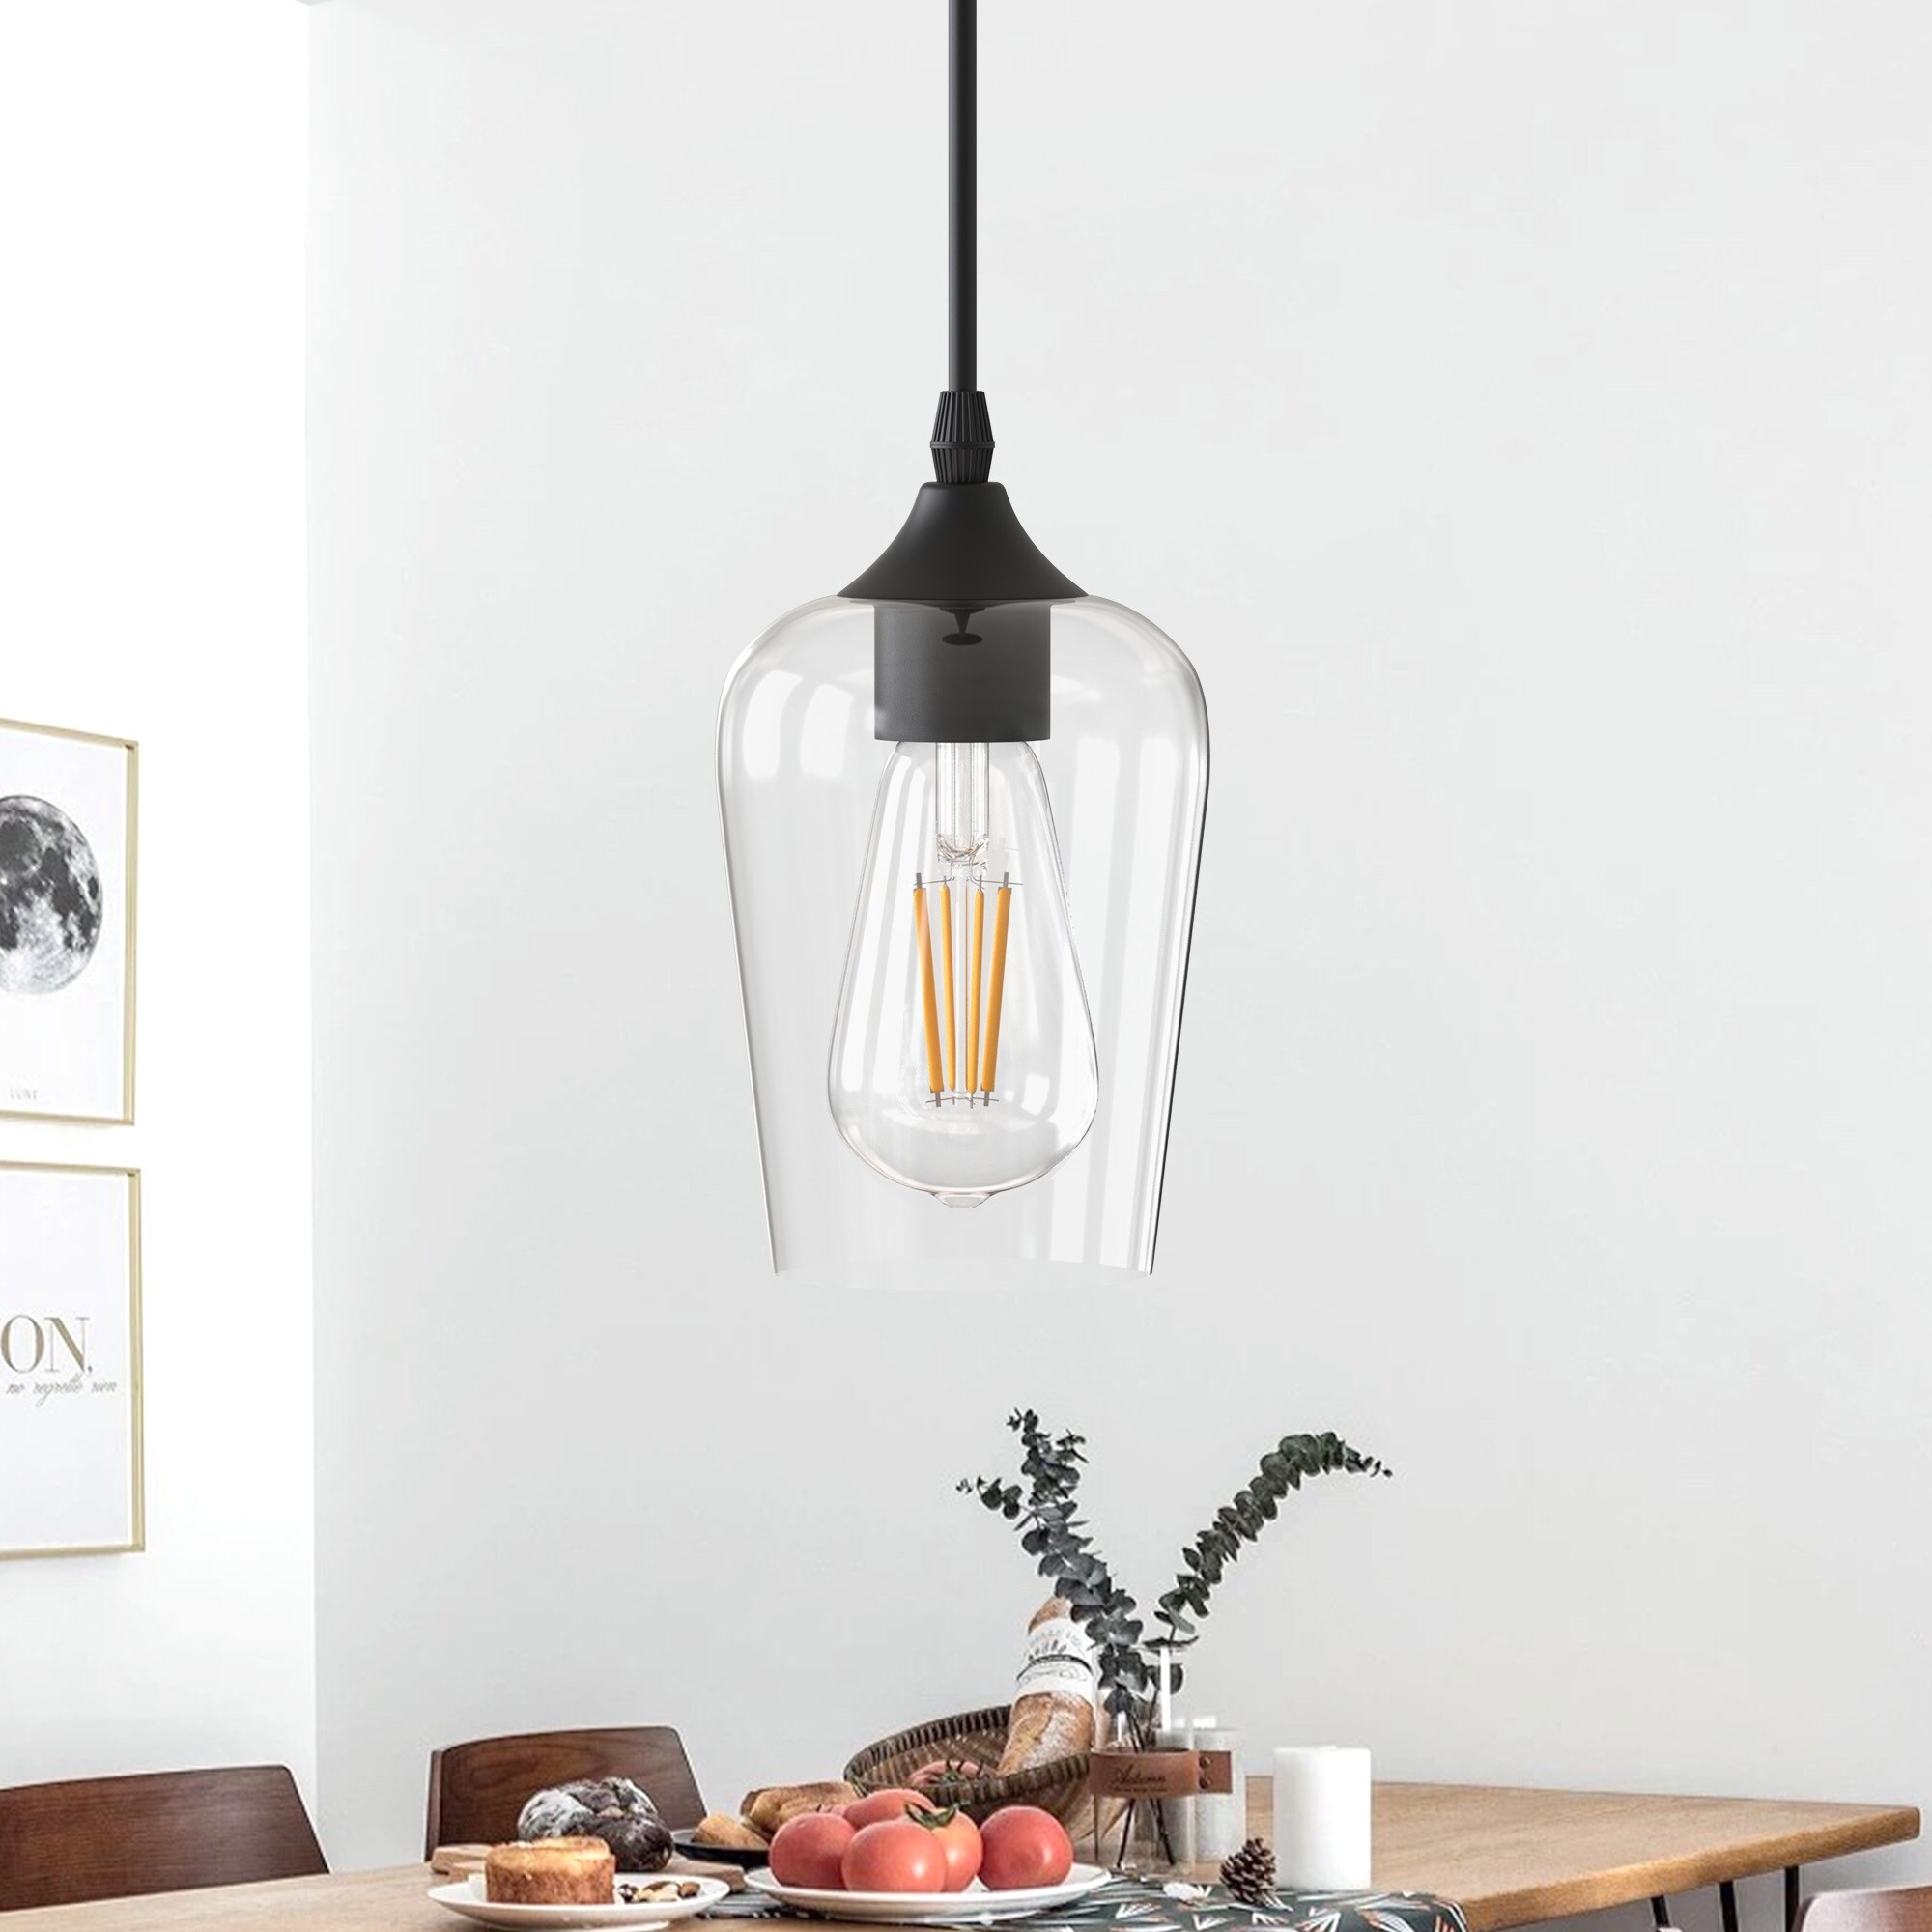 https://ak1.ostkcdn.com/images/products/is/images/direct/e38a399ff52a07fa3266ea07fc77bc615bd72e56/YANSUN-Black-Pendant-Light-Fixtures-%282-Pack%29-Modern-Kitchen-Island-Lighting-with-Cylinder-Glass.jpg